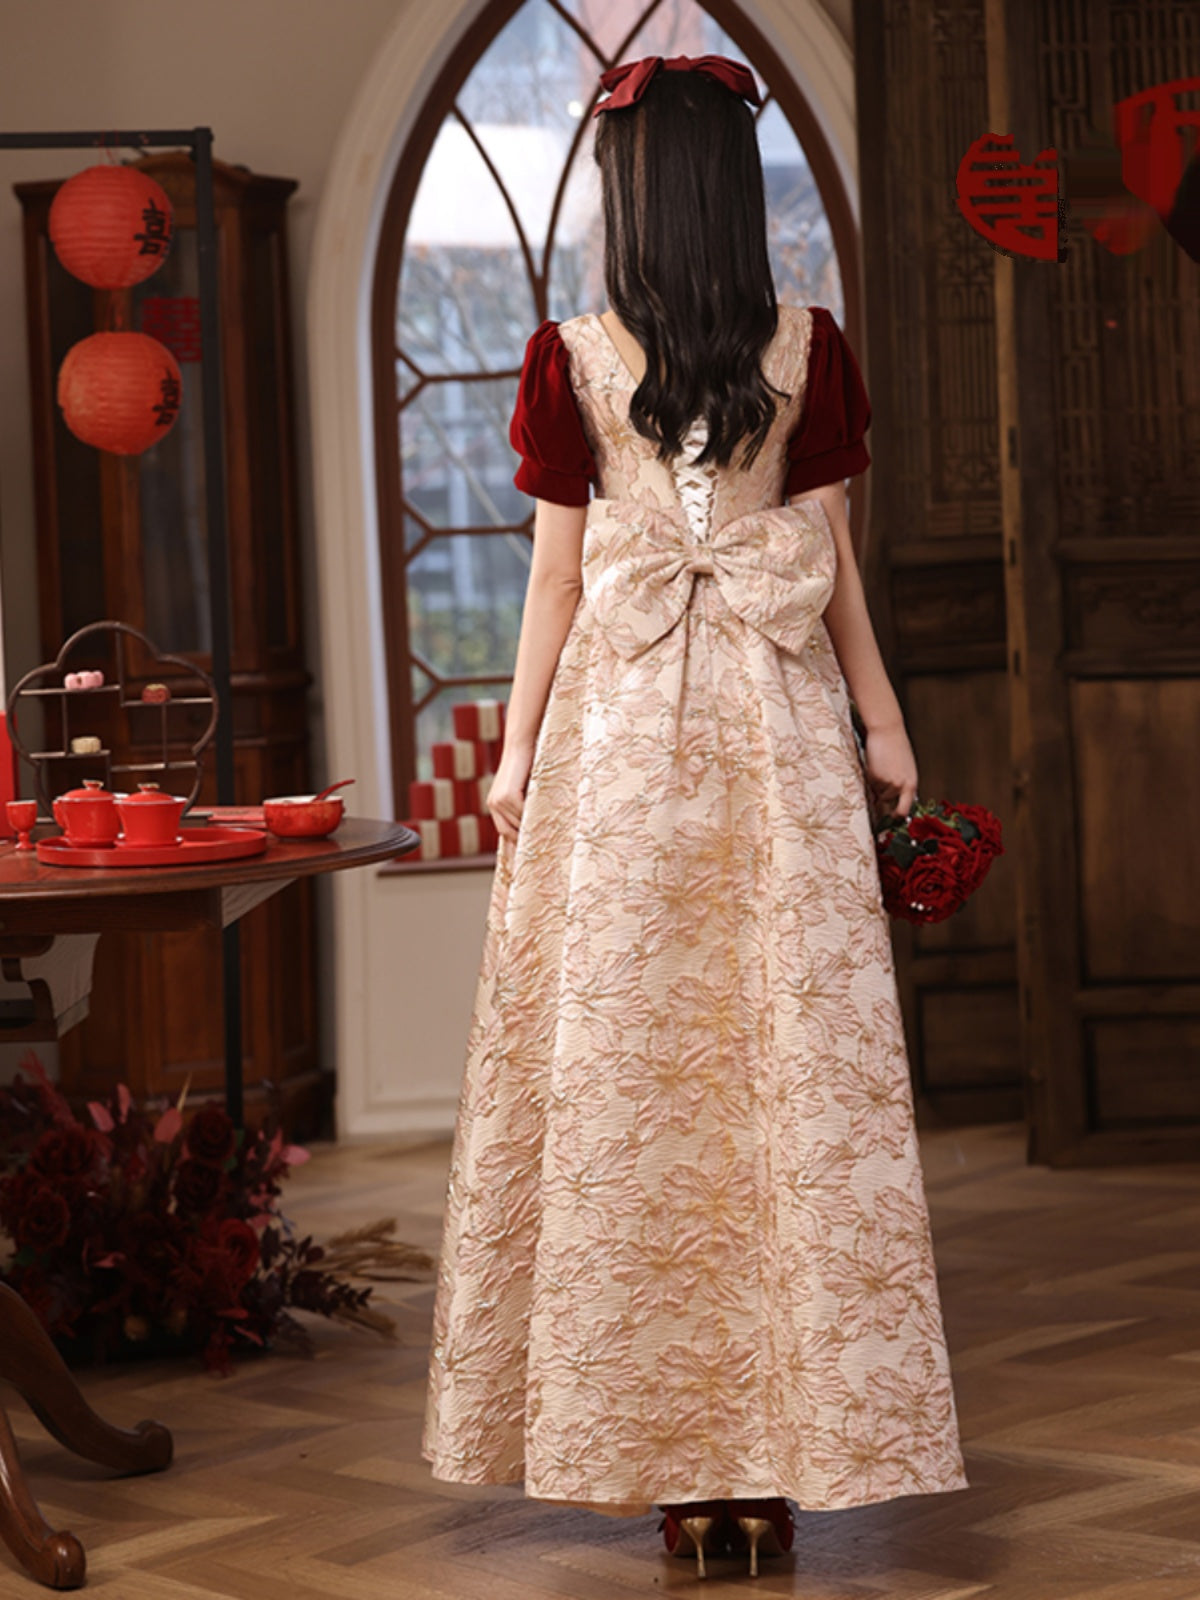 Vintage-Inspired Floral Jacquard Ball Gown with Velvet Accents - Harmony Gallery